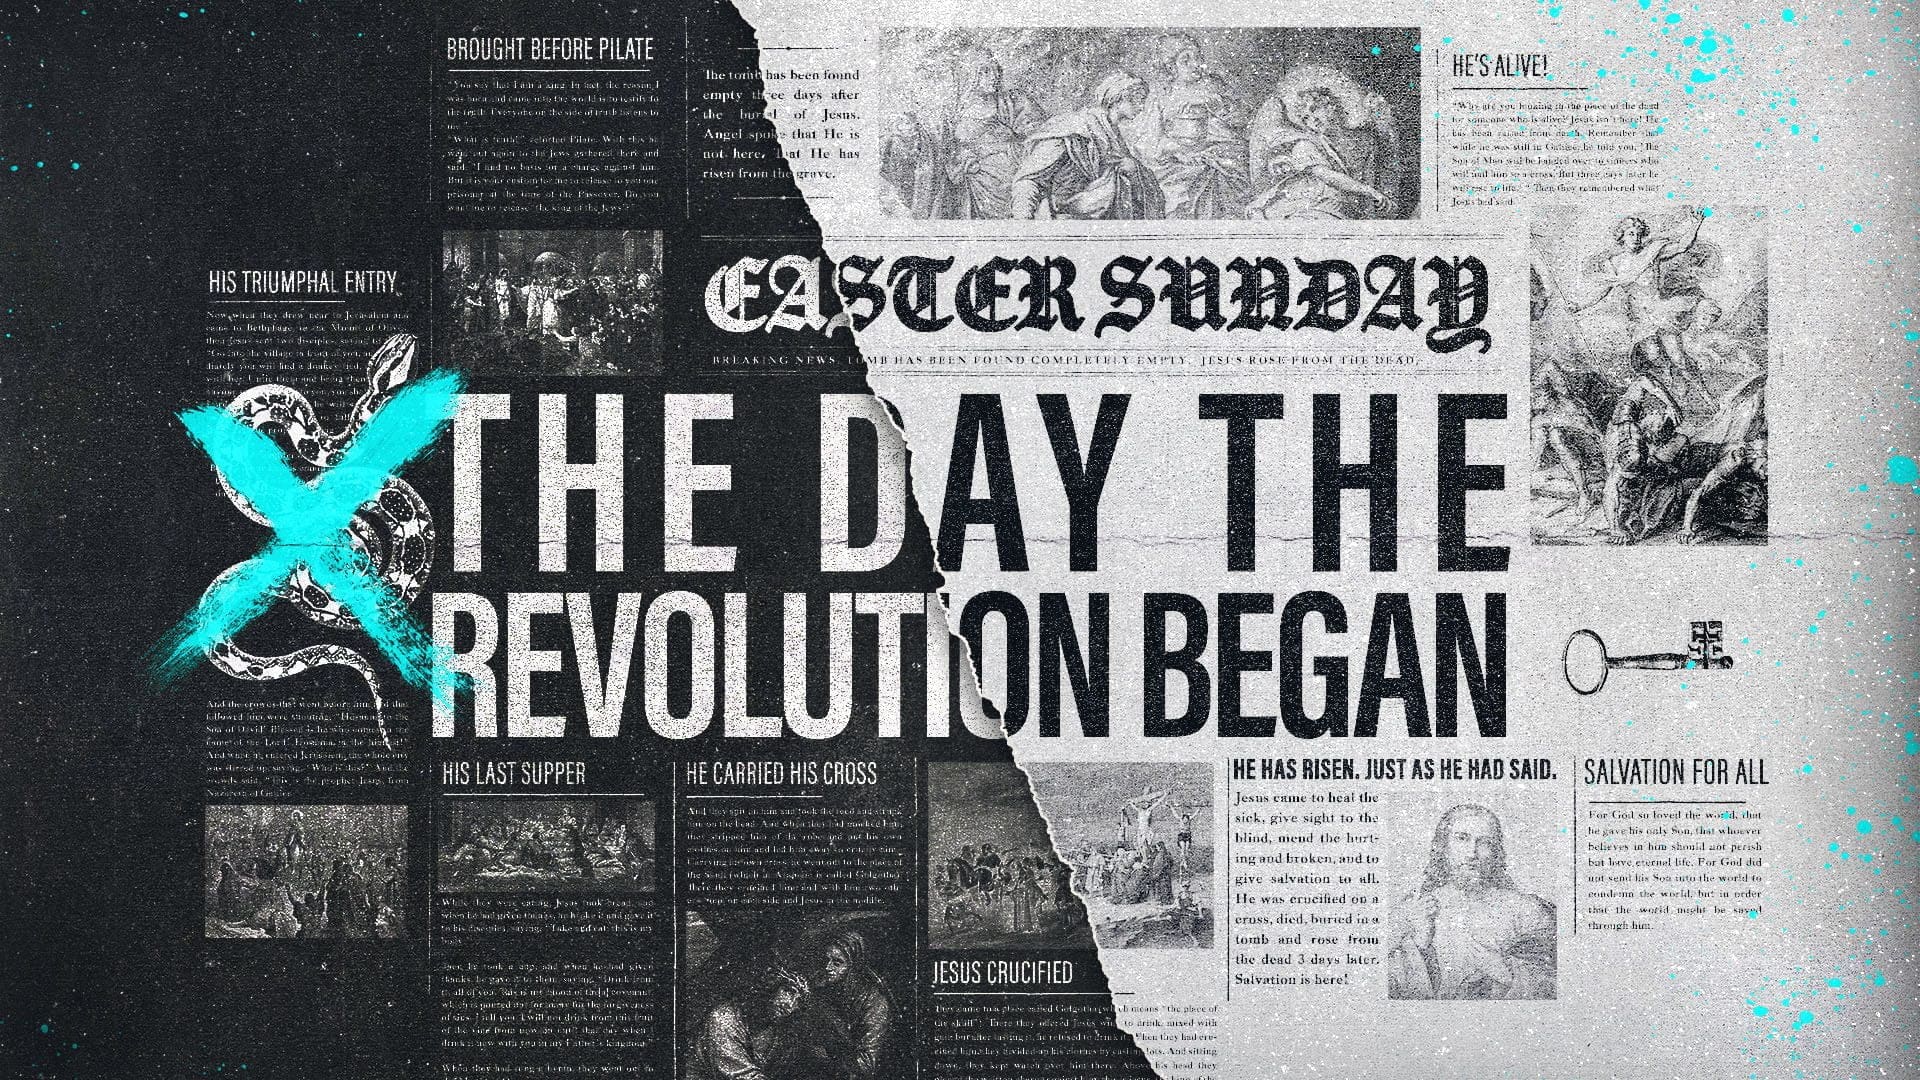 The Day the Revolution Began Image